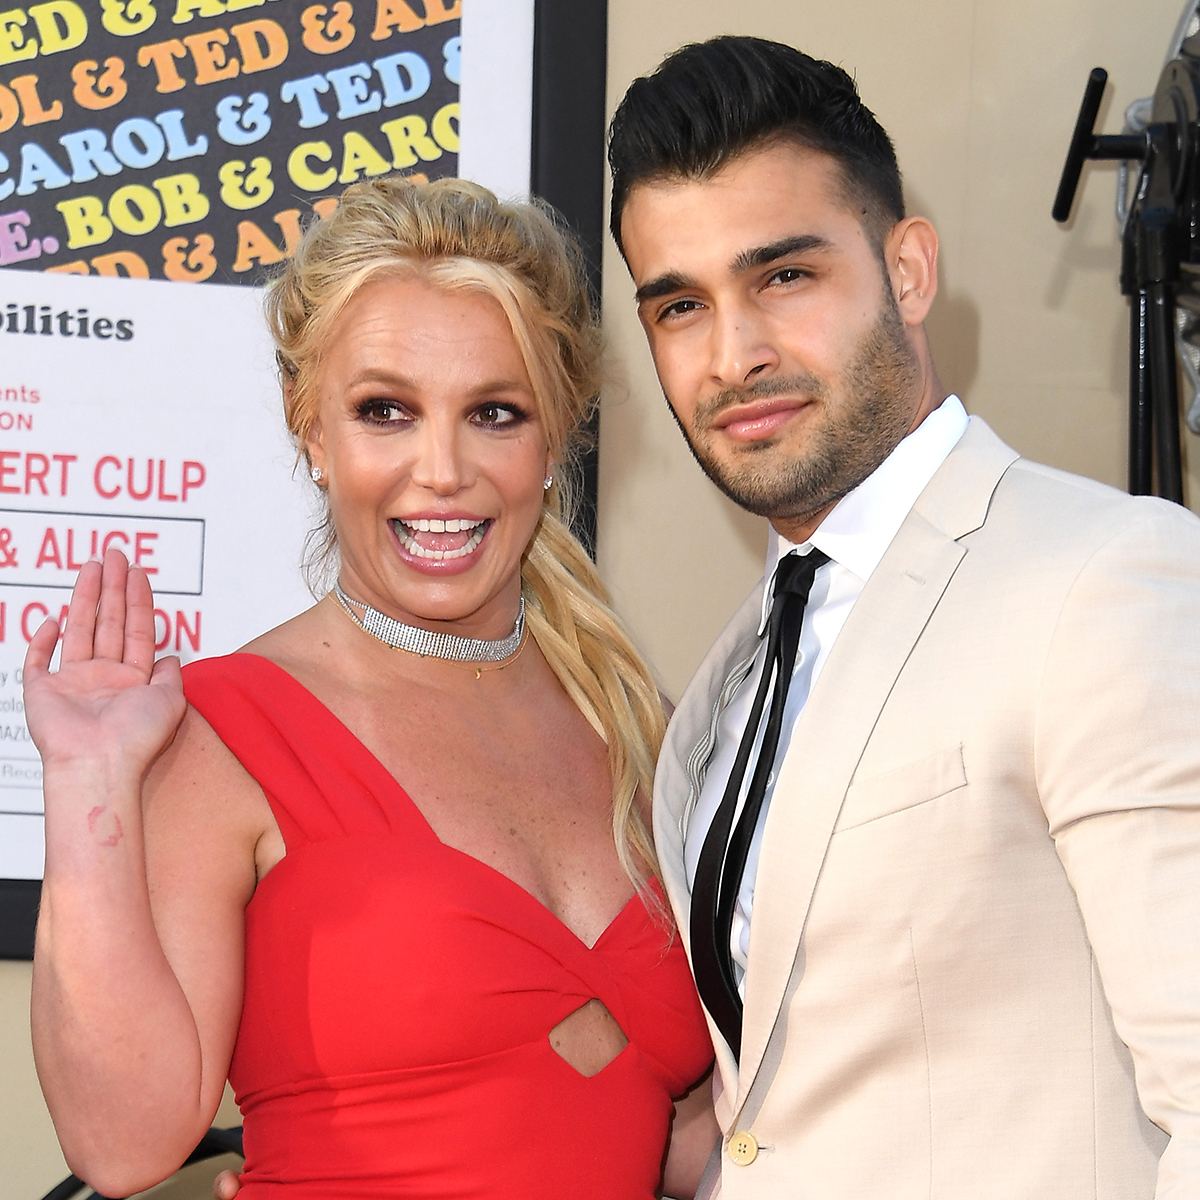 Britney Spears & Sam Asghari Split: Relive the Pieces of Their Romance